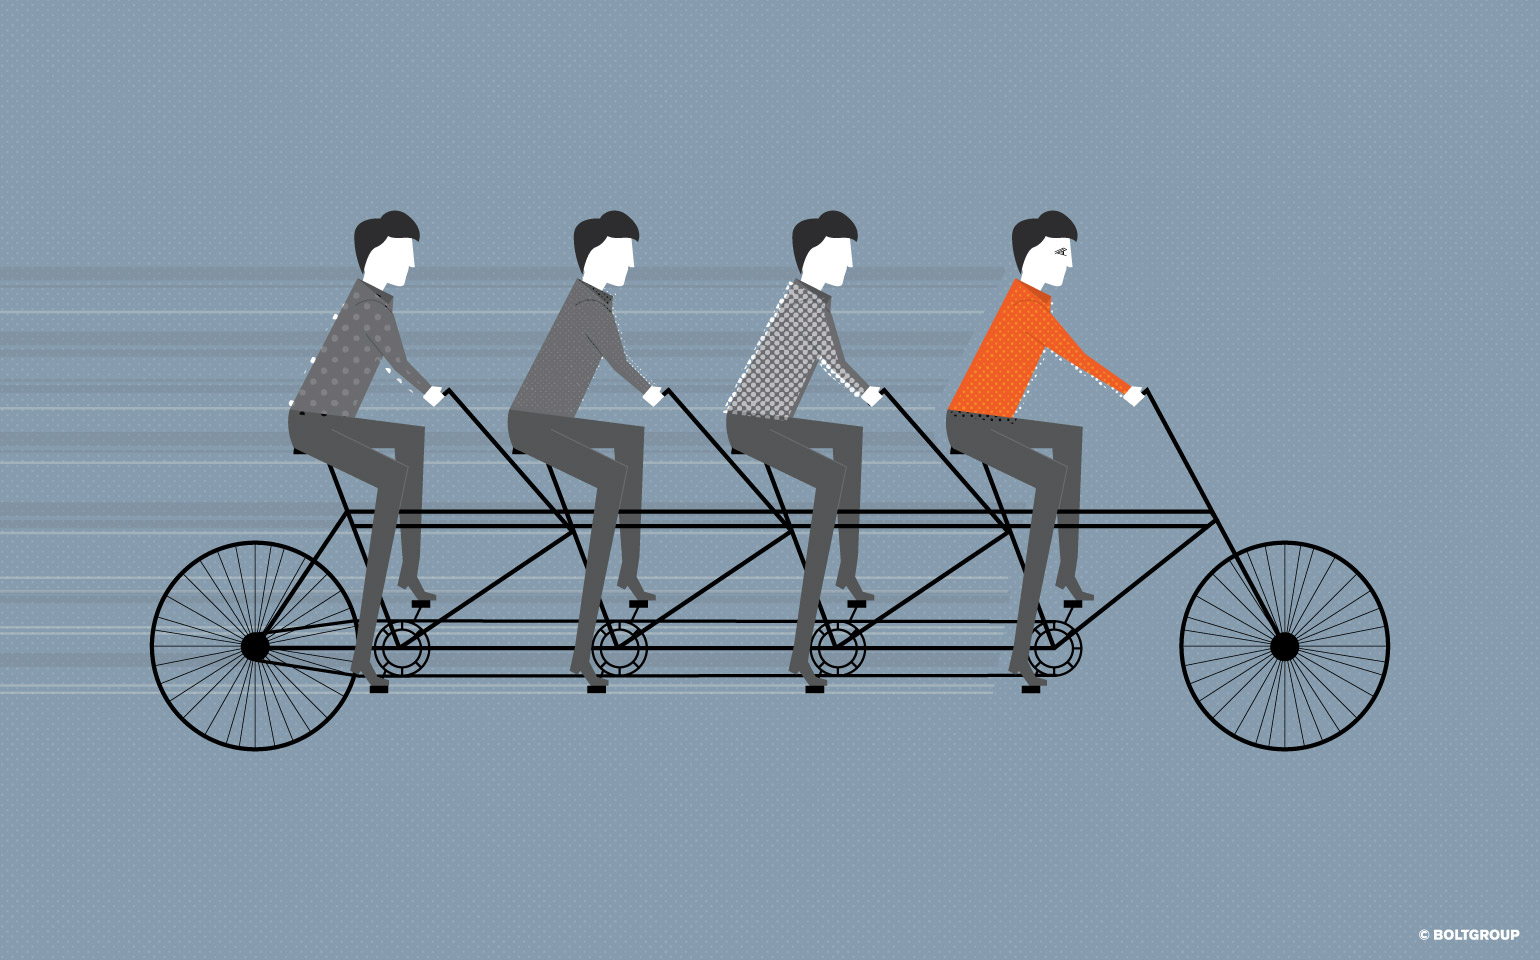 illustration of 4 people on bicycle